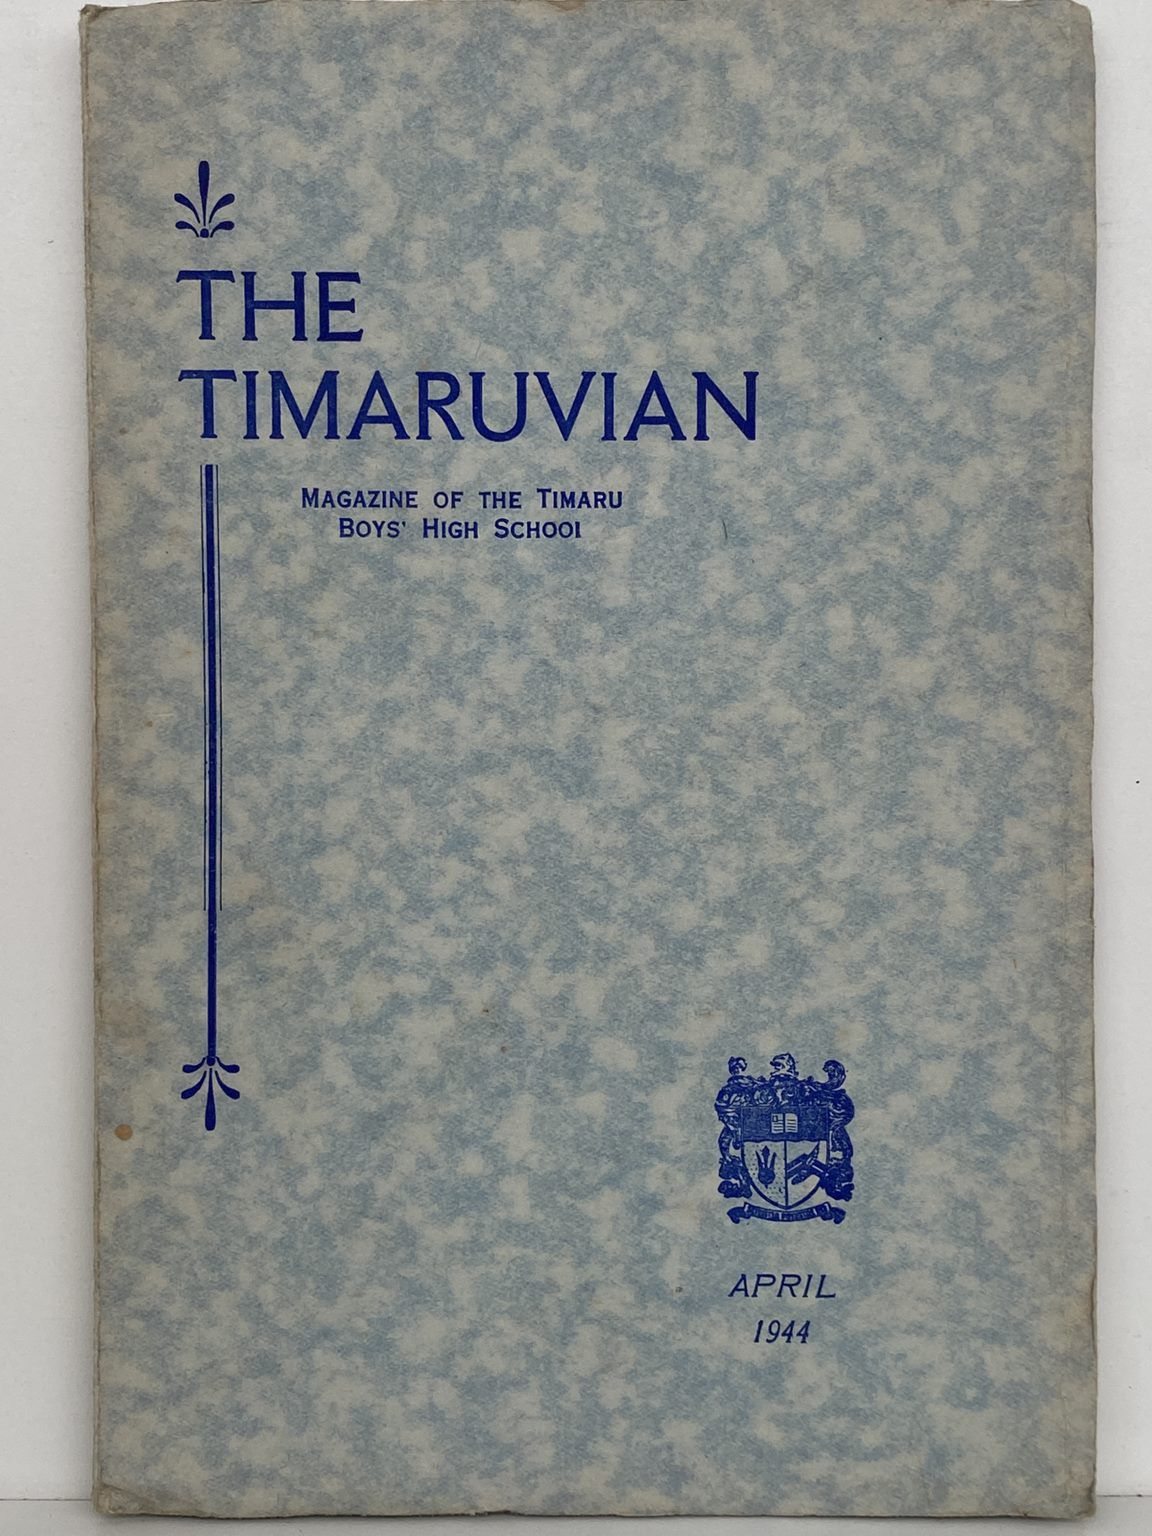 THE TIMARUVIAN: Magazine of the Timaru Boys' High School and its Old Boys' Association 1944